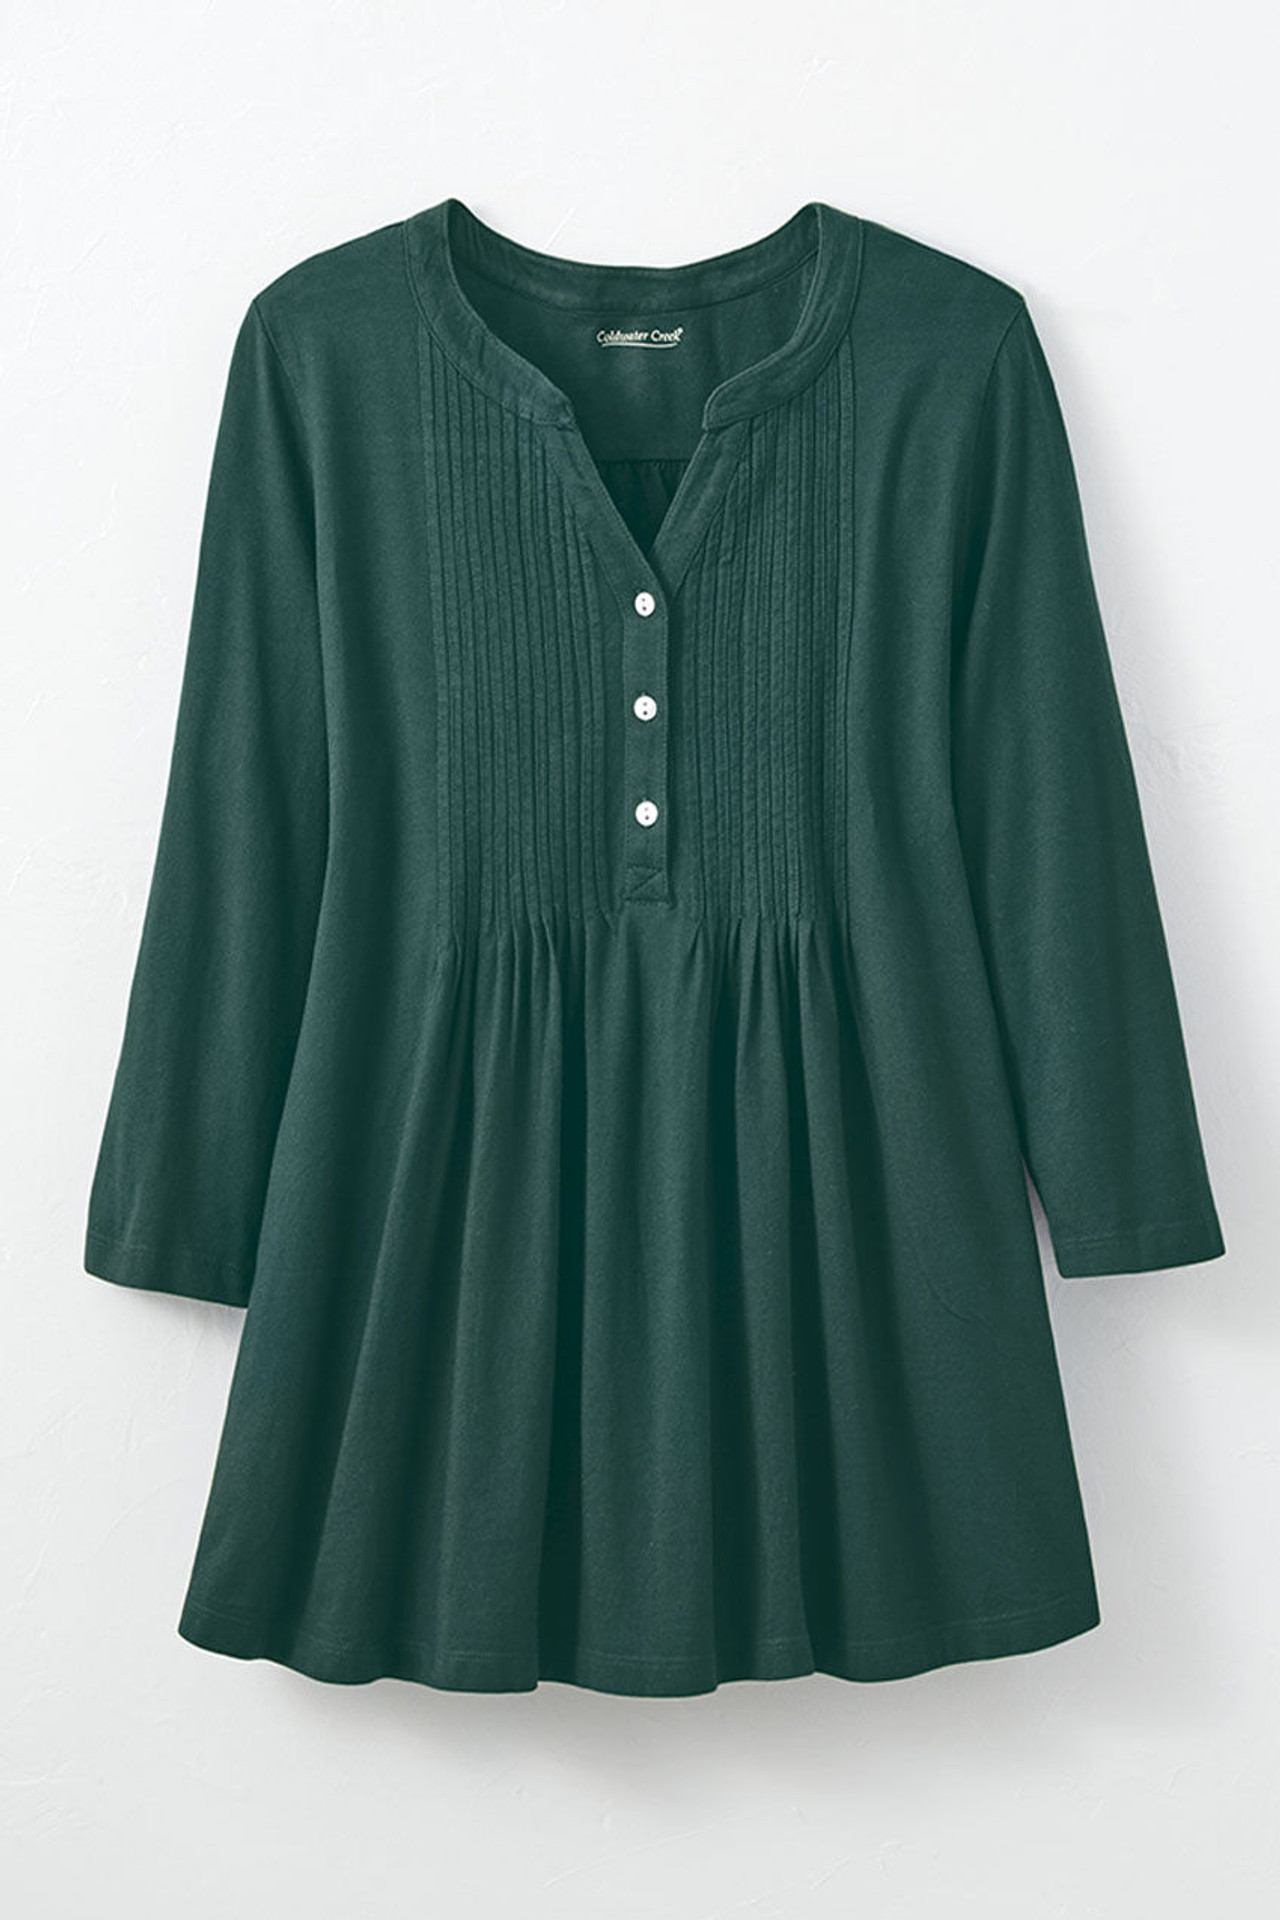 Pintucked Knit Henley A-line Tunic